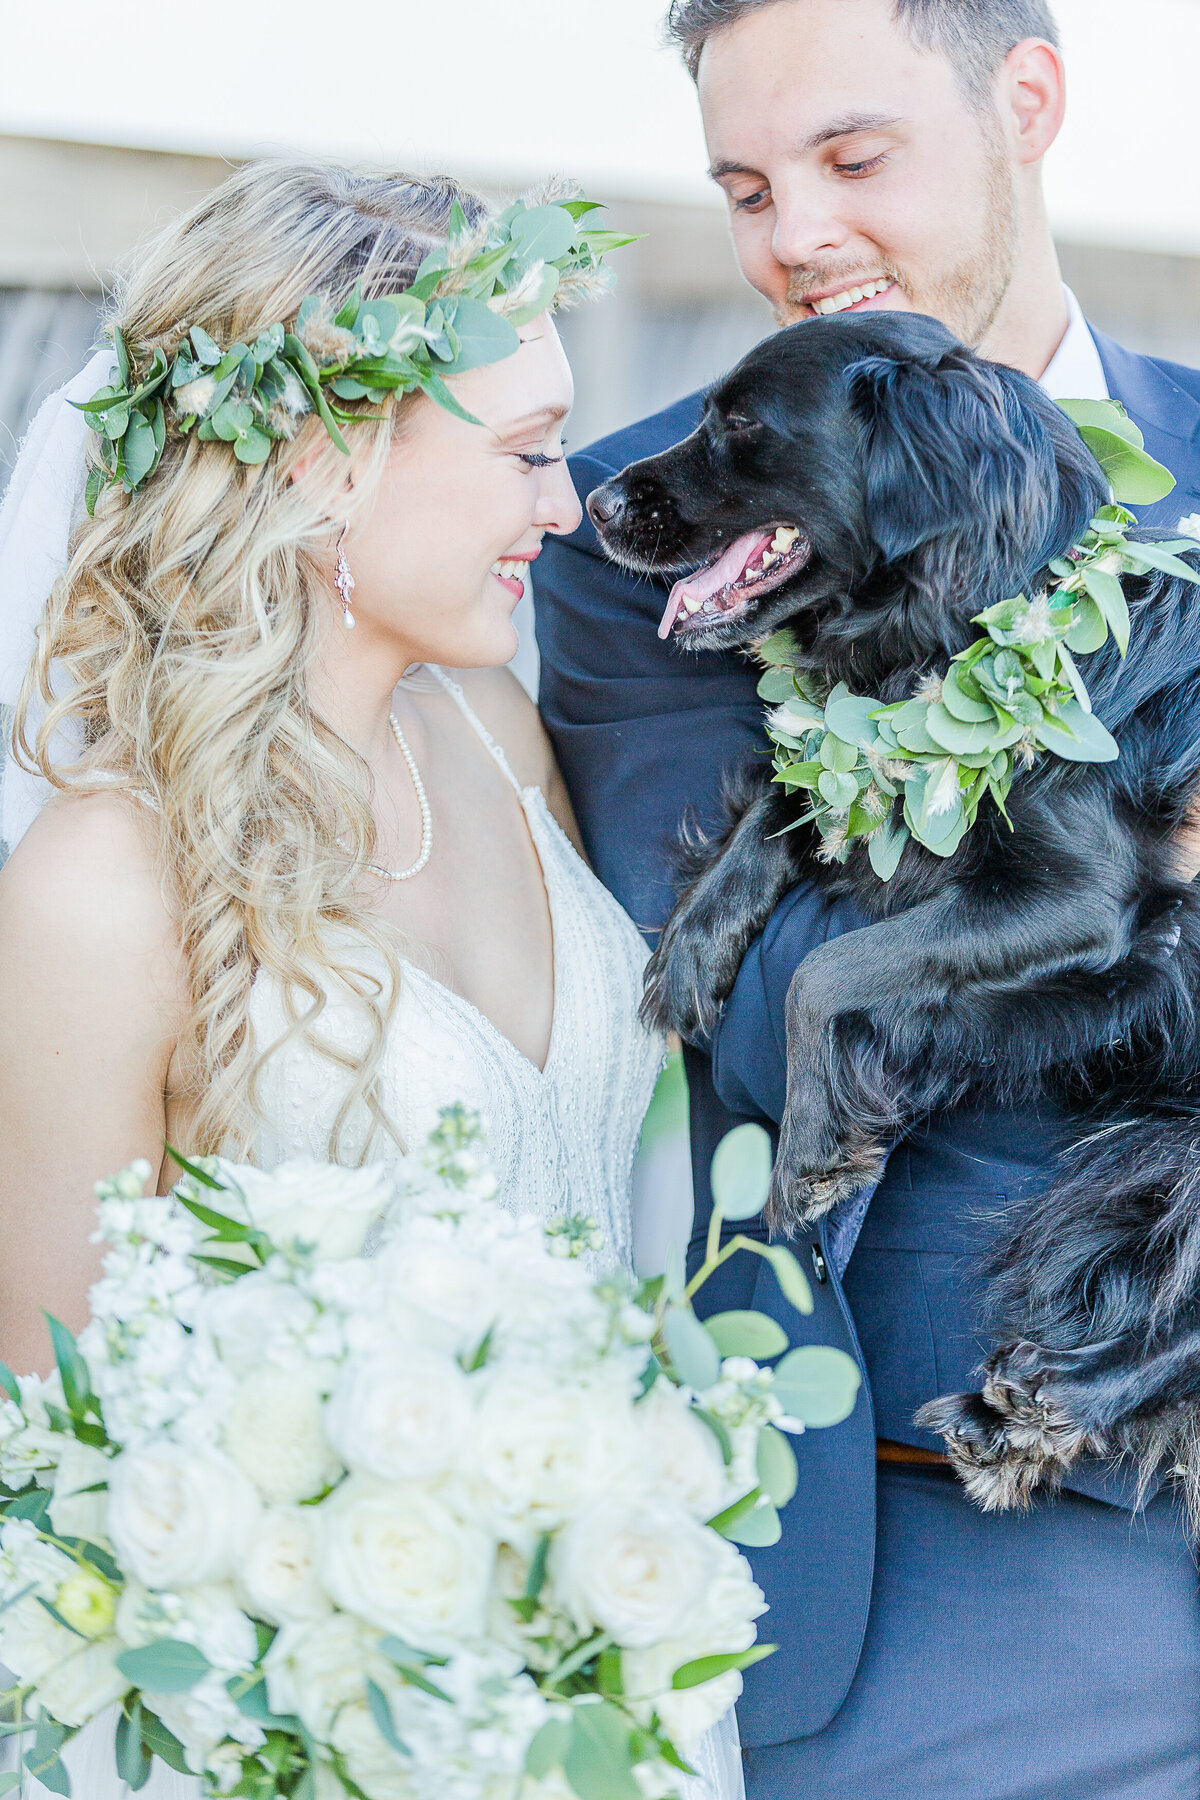 Bride and groom pose for a fun wedding portrait with their black pup. The pup is wearing a floral collar. Captured by best New England wedding photographer Lia Rose Weddings.